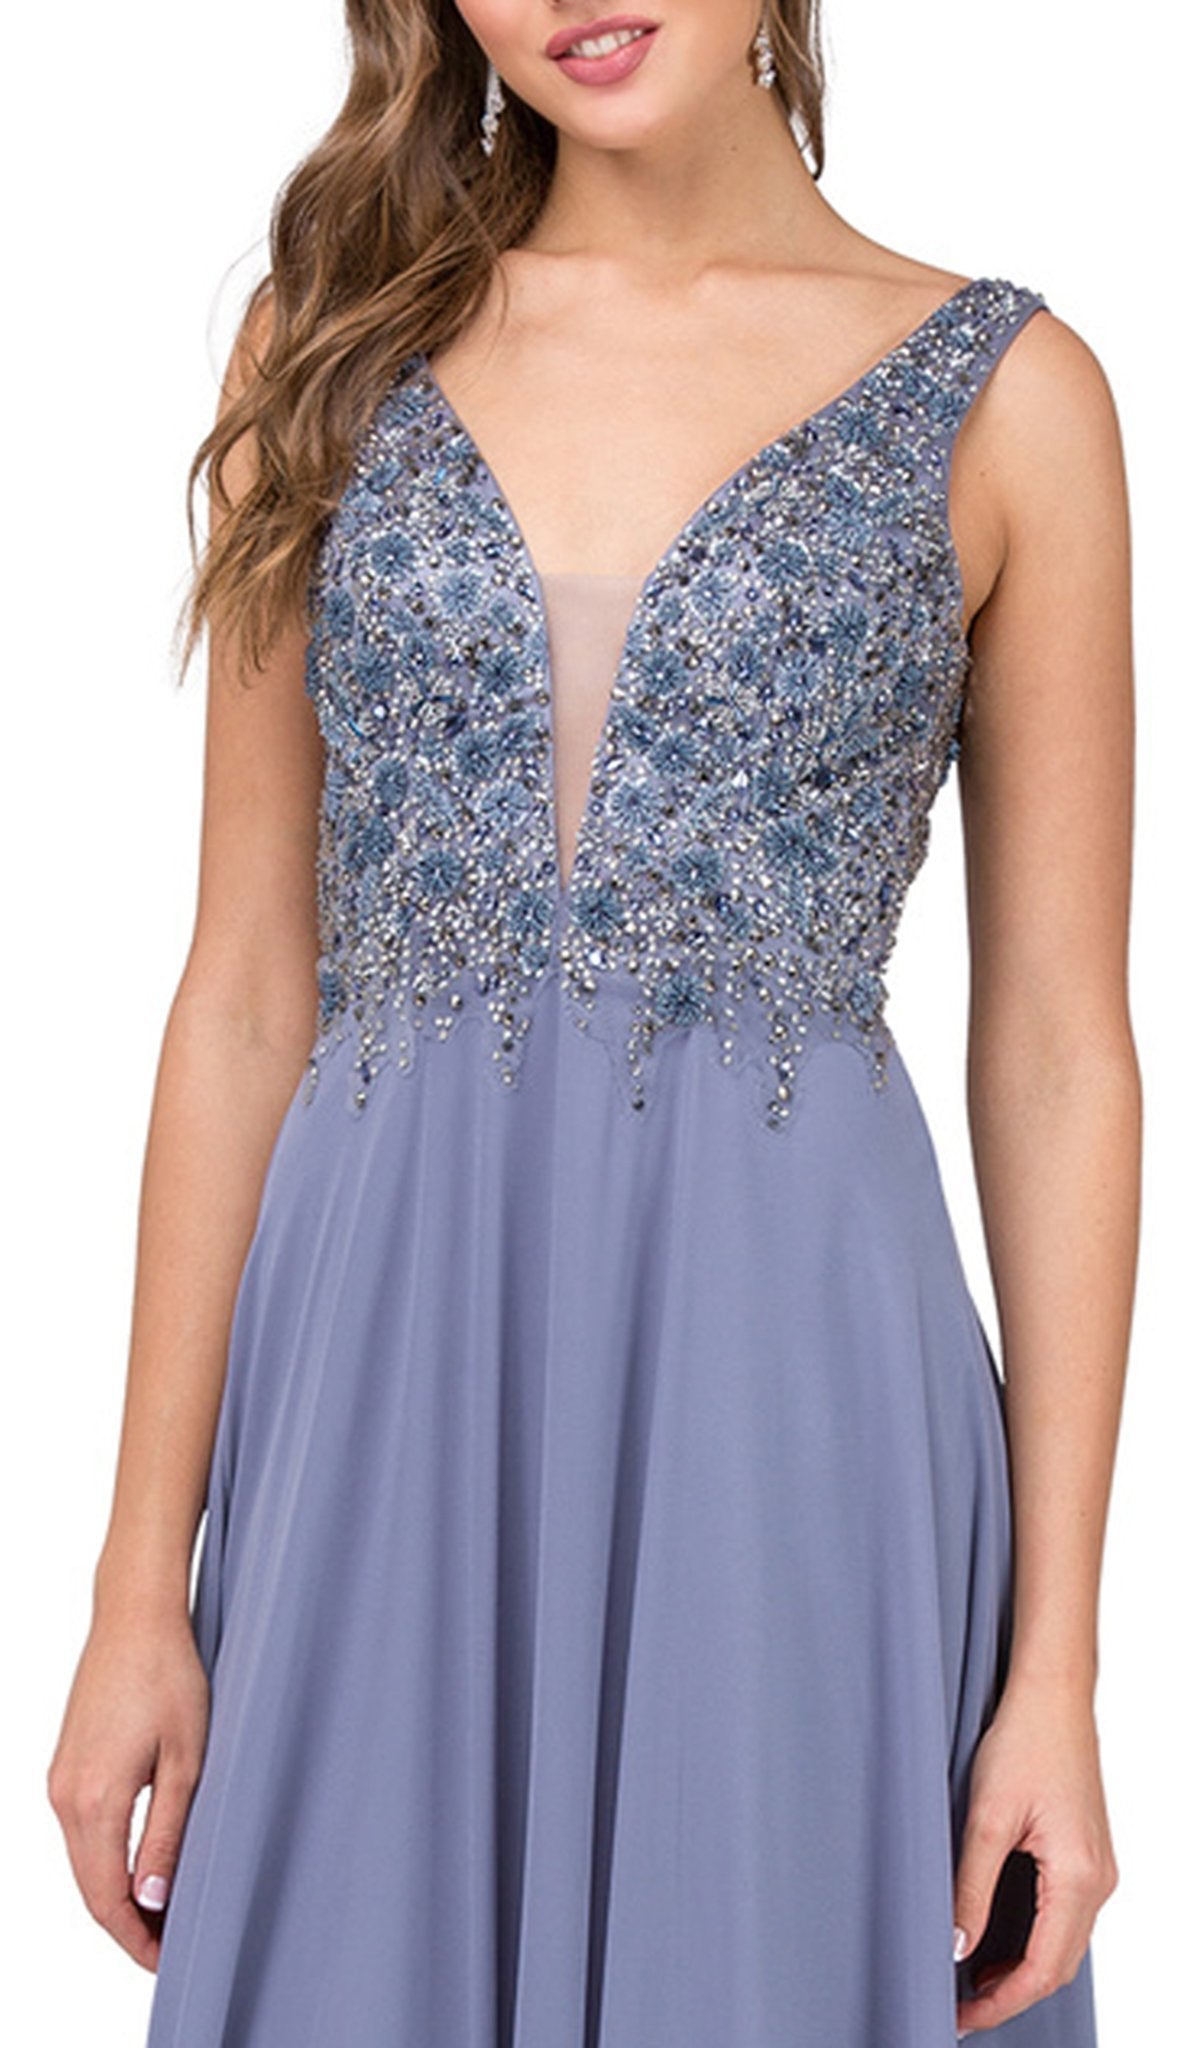 Dancing Queen - 2312 Floral Beaded Deep V-neck A-line Prom Dress In Dark Silver